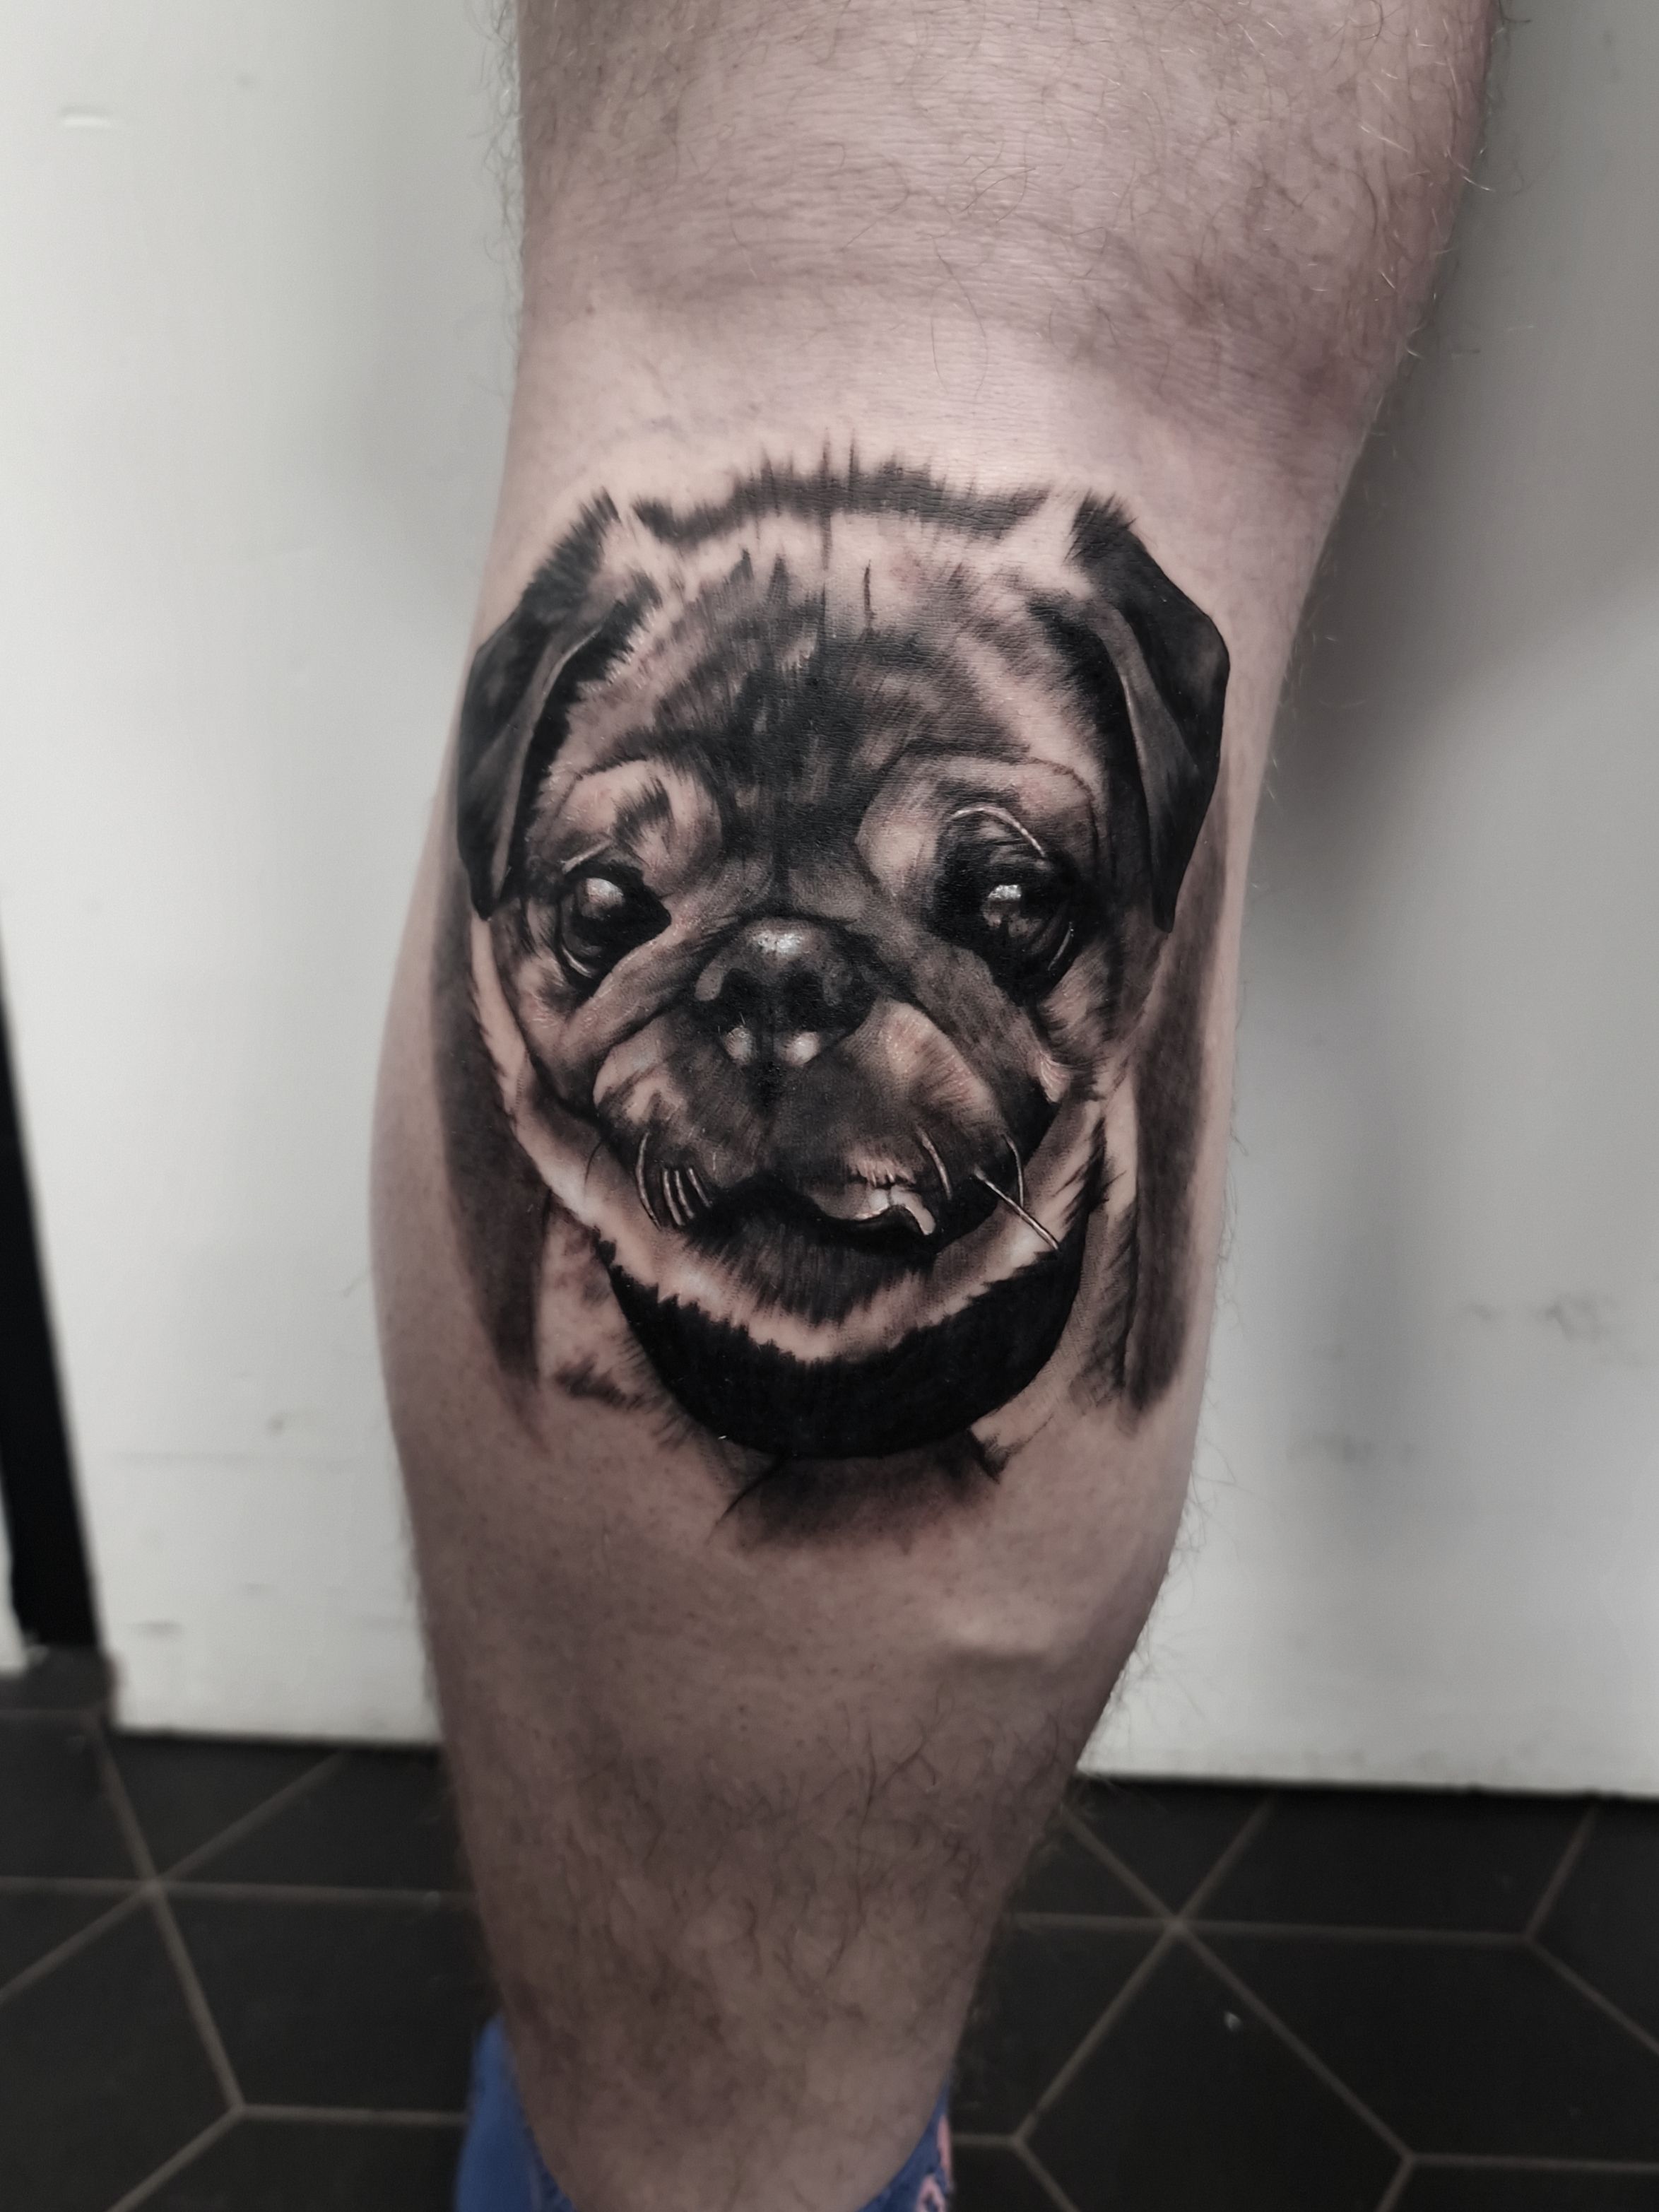 The 23 Minimalist Pug Tattoo Designs | Page 2 of 8 | The Dogman | Pug tattoo,  Dog tattoos, Dog portrait tattoo